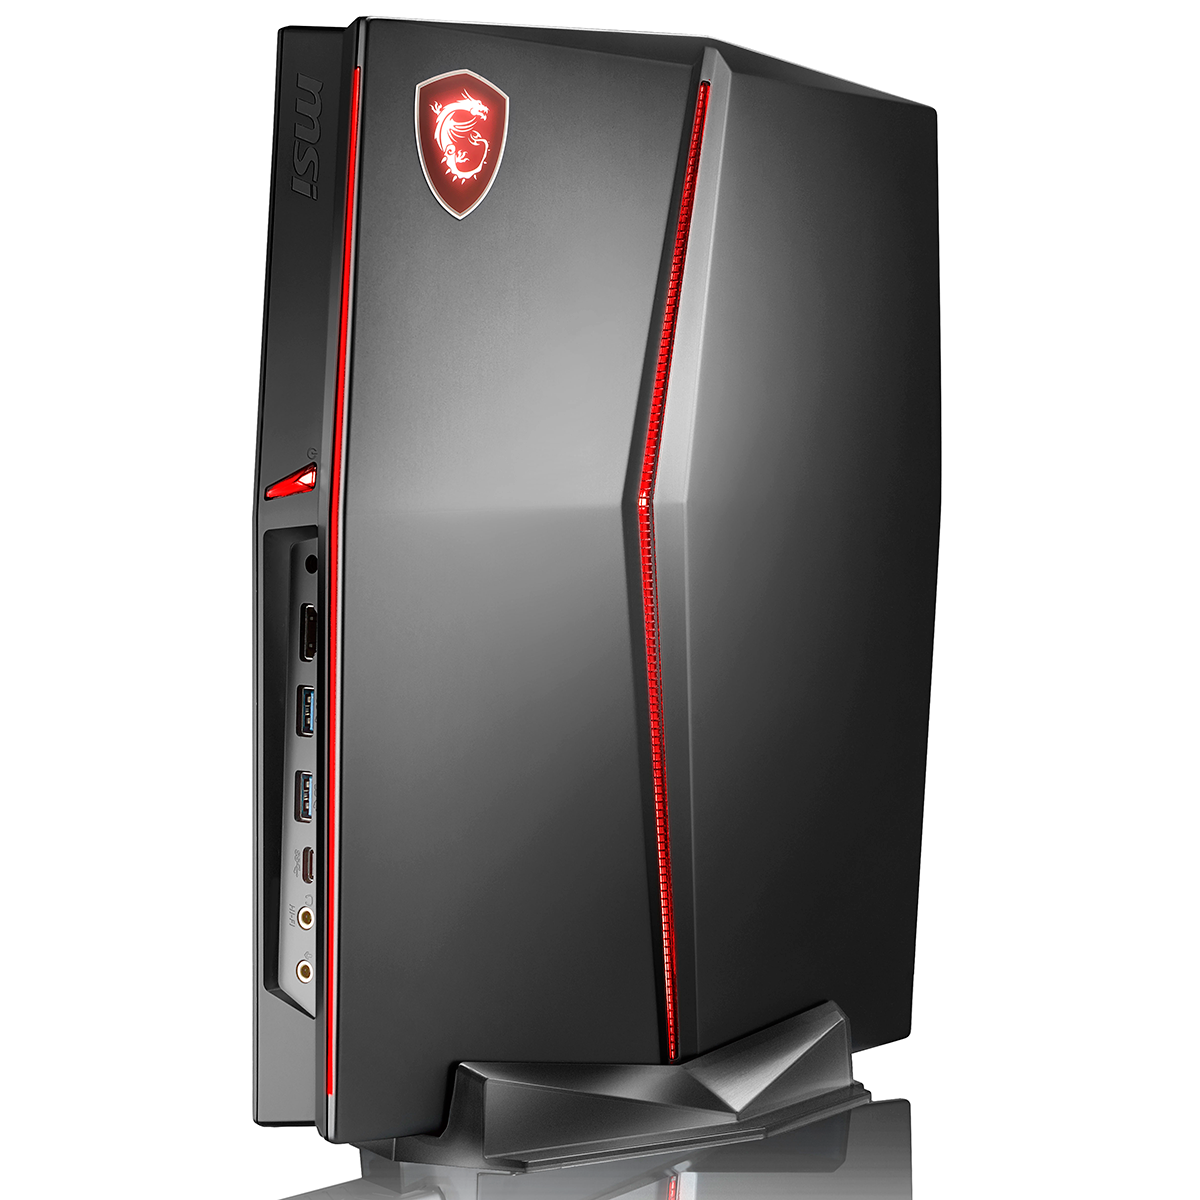 msi-launches-small-form-factor-vortex-g25-gaming-desktop-systems